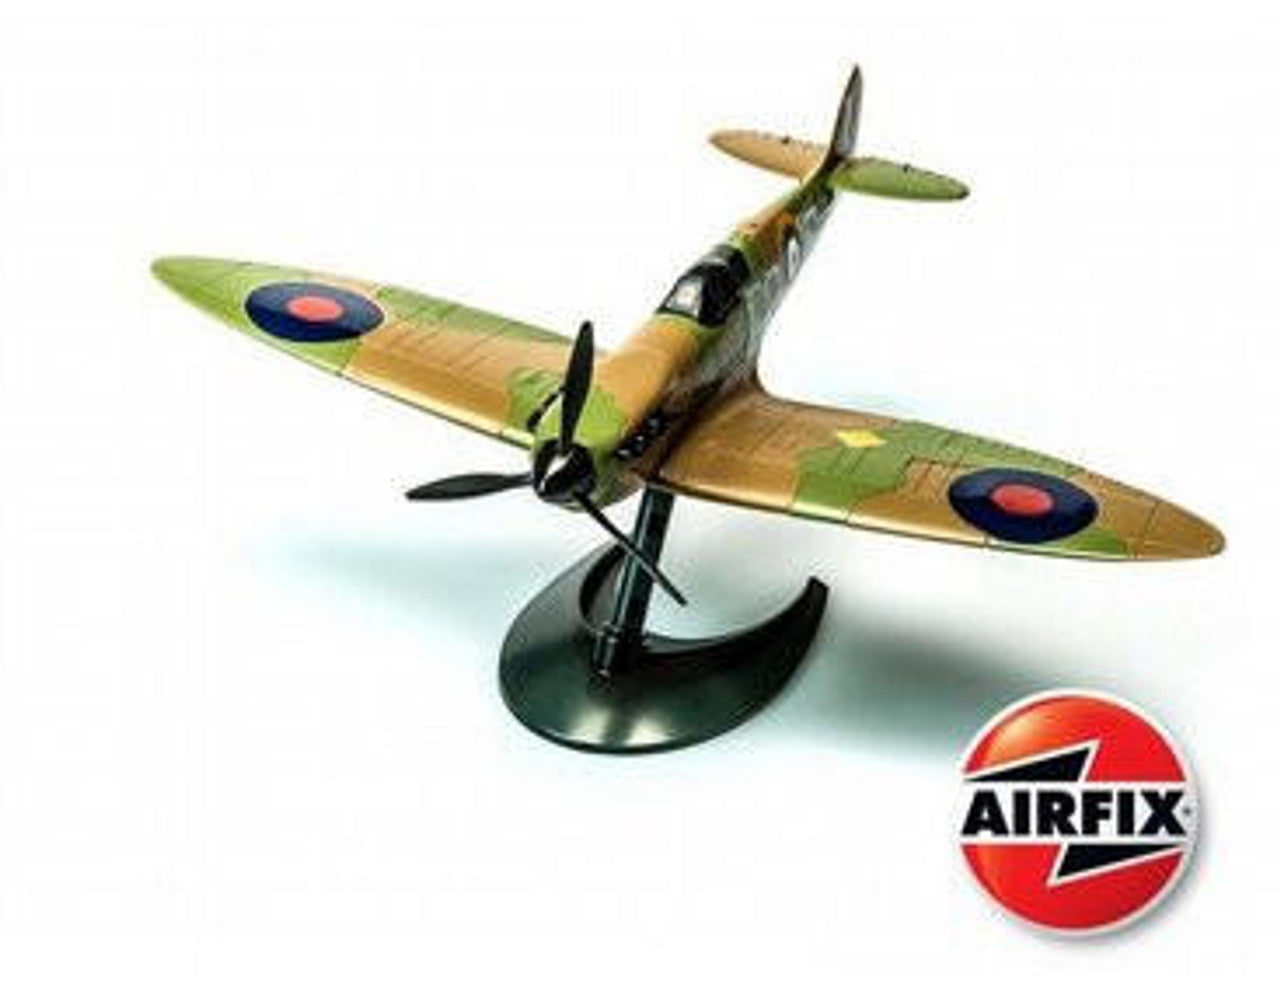 Airfix QUICKBUILD Spitfire - Loaded Dice Barry Vale of Glamorgan CF64 3HD